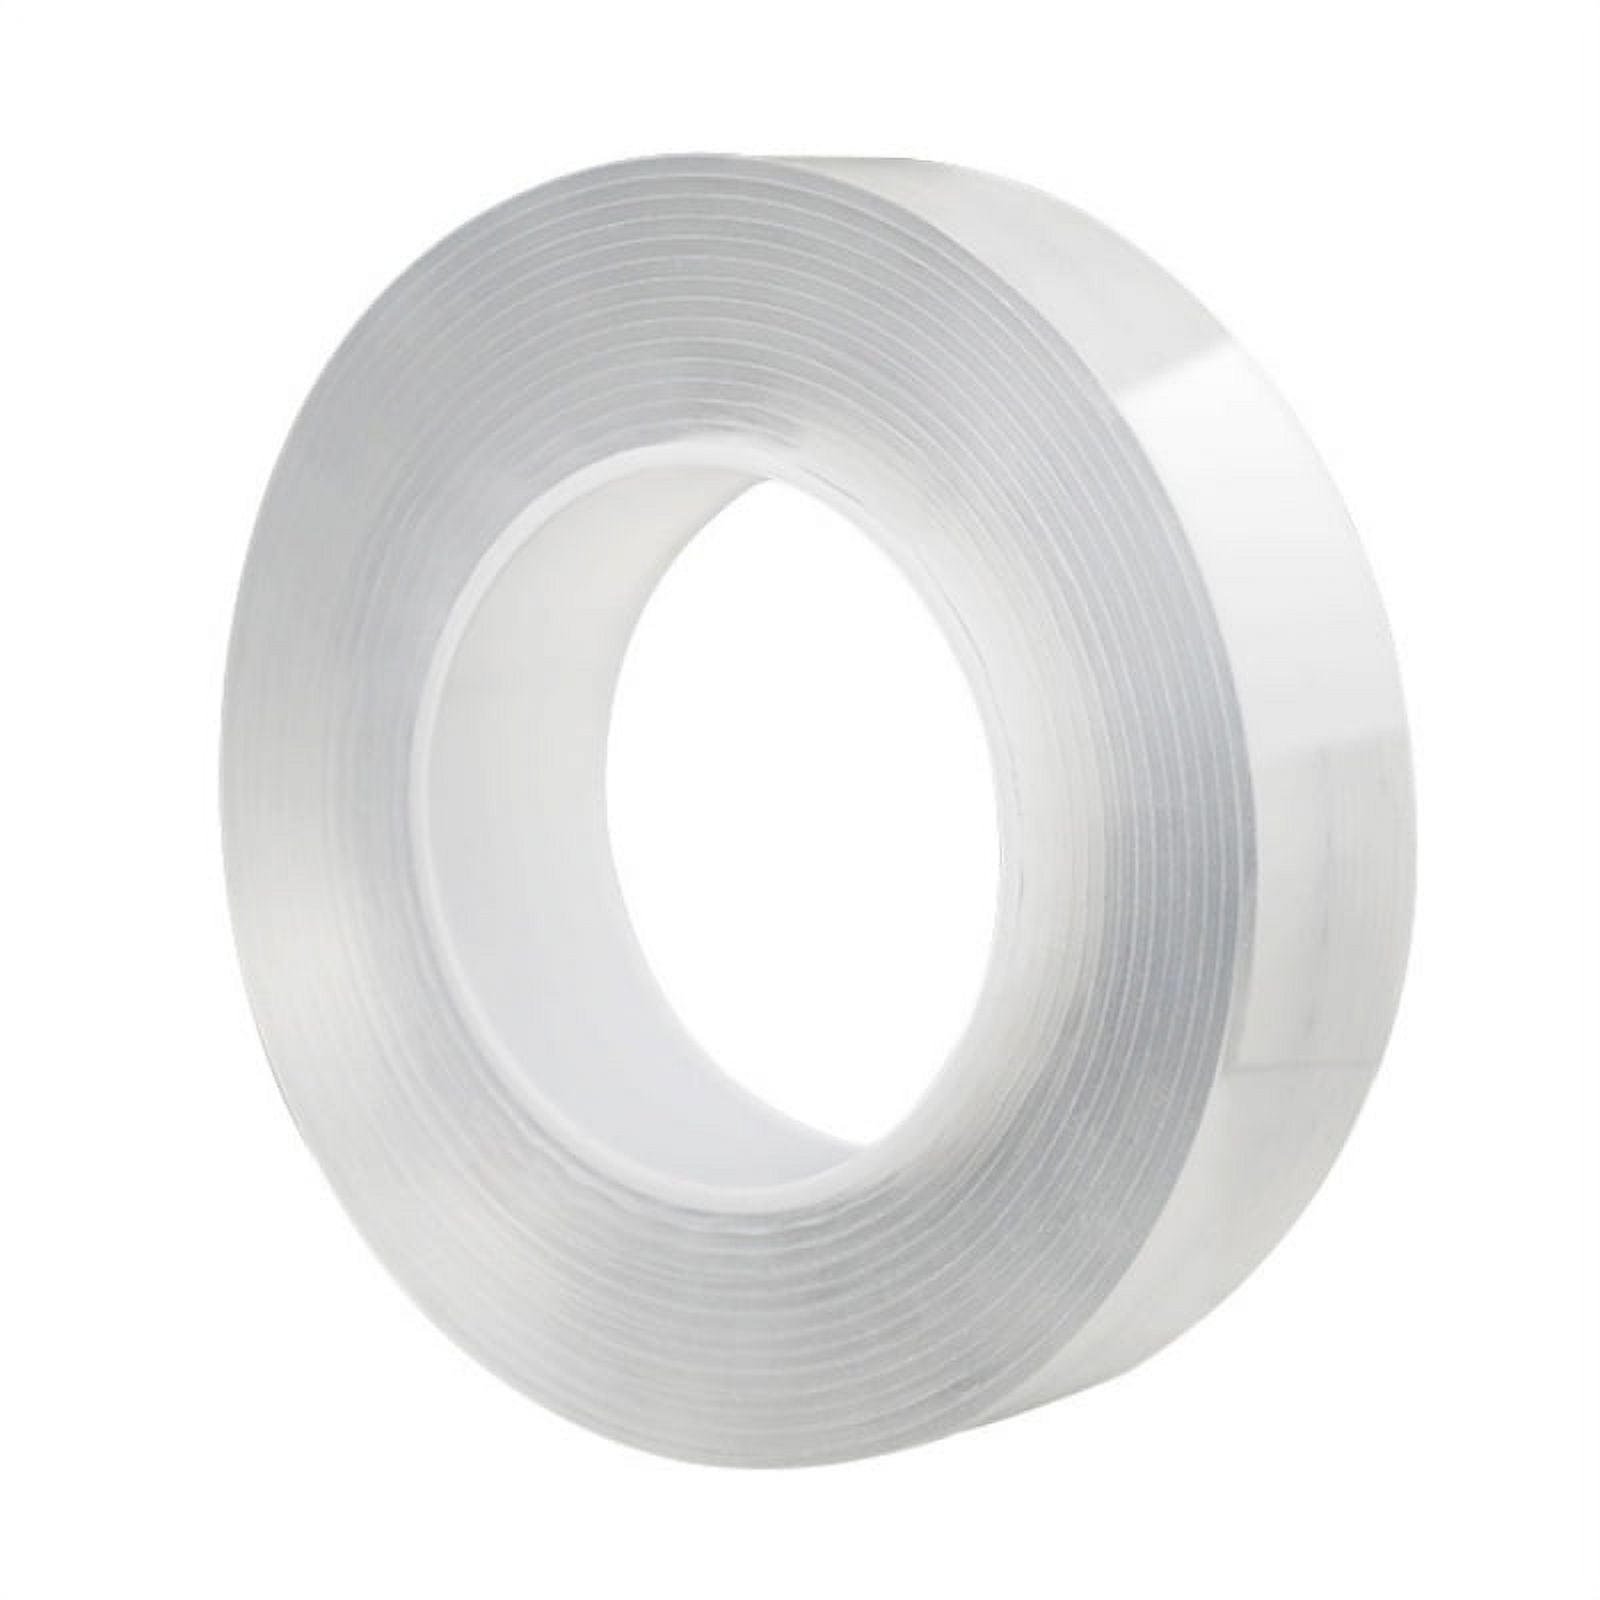 3M Strips Non-nail Double-sided Adhesive Strip Non-trace